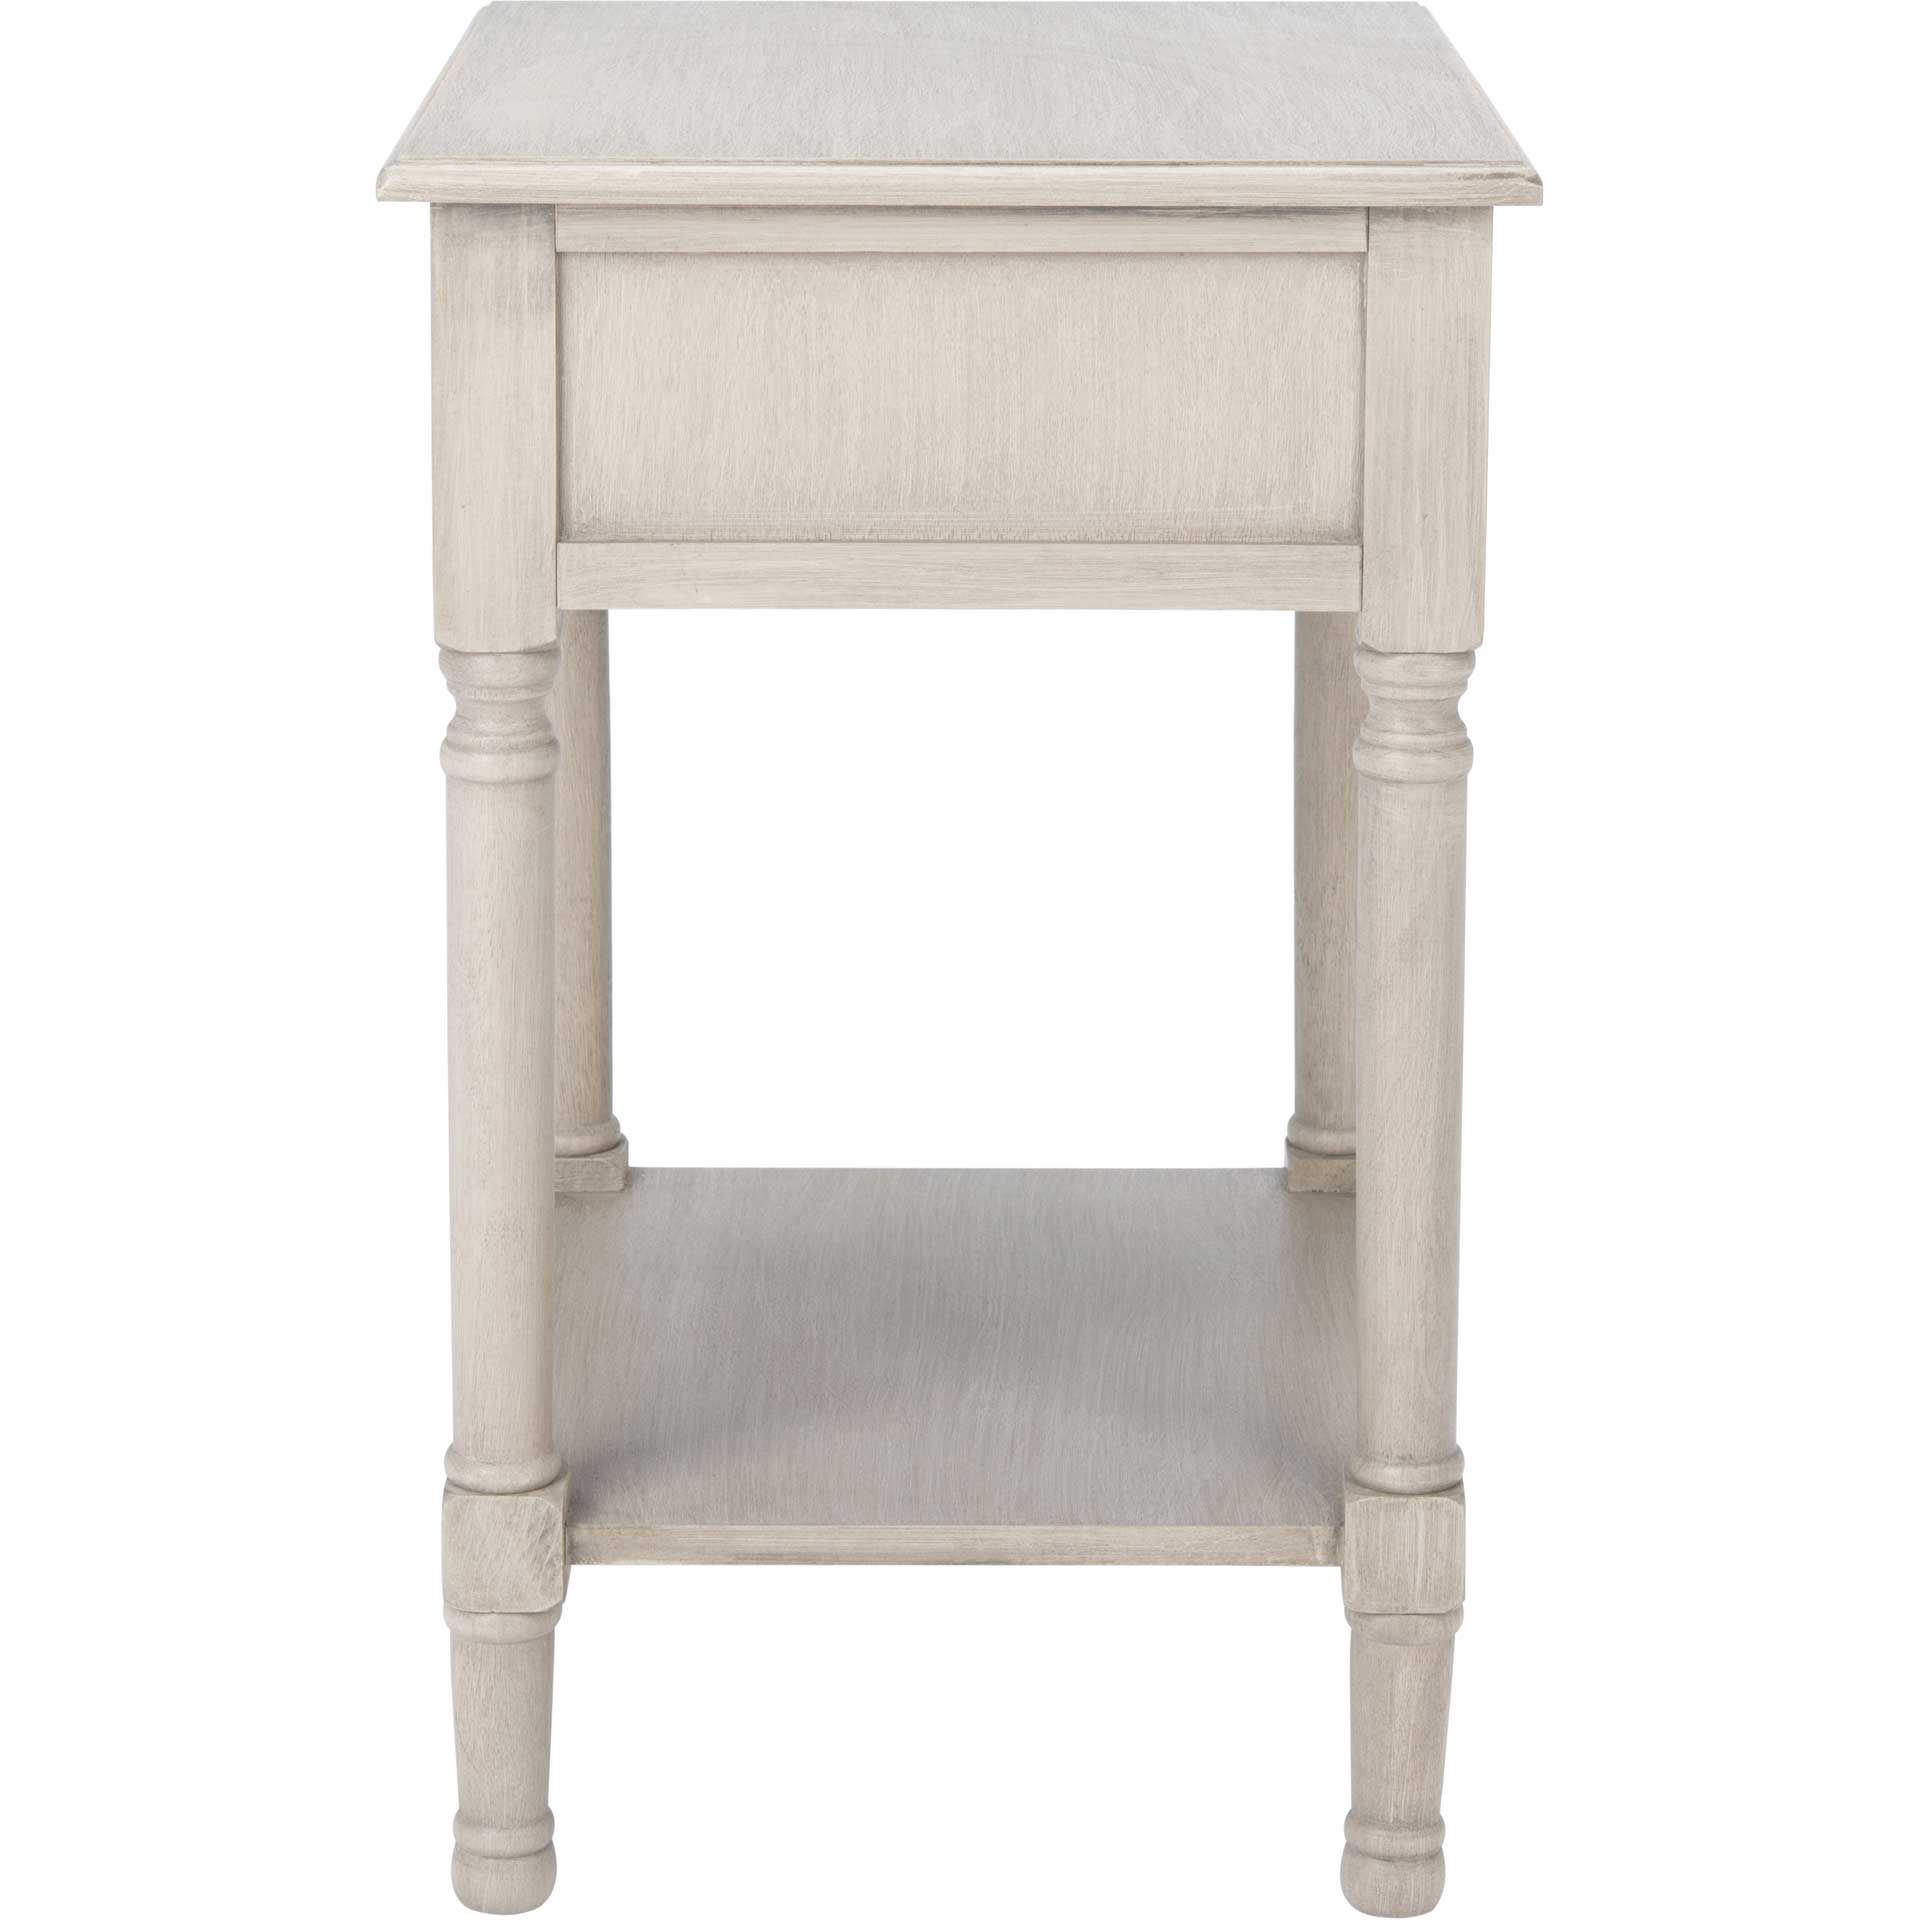 Whalen 1 Drawer Accent Table Greige